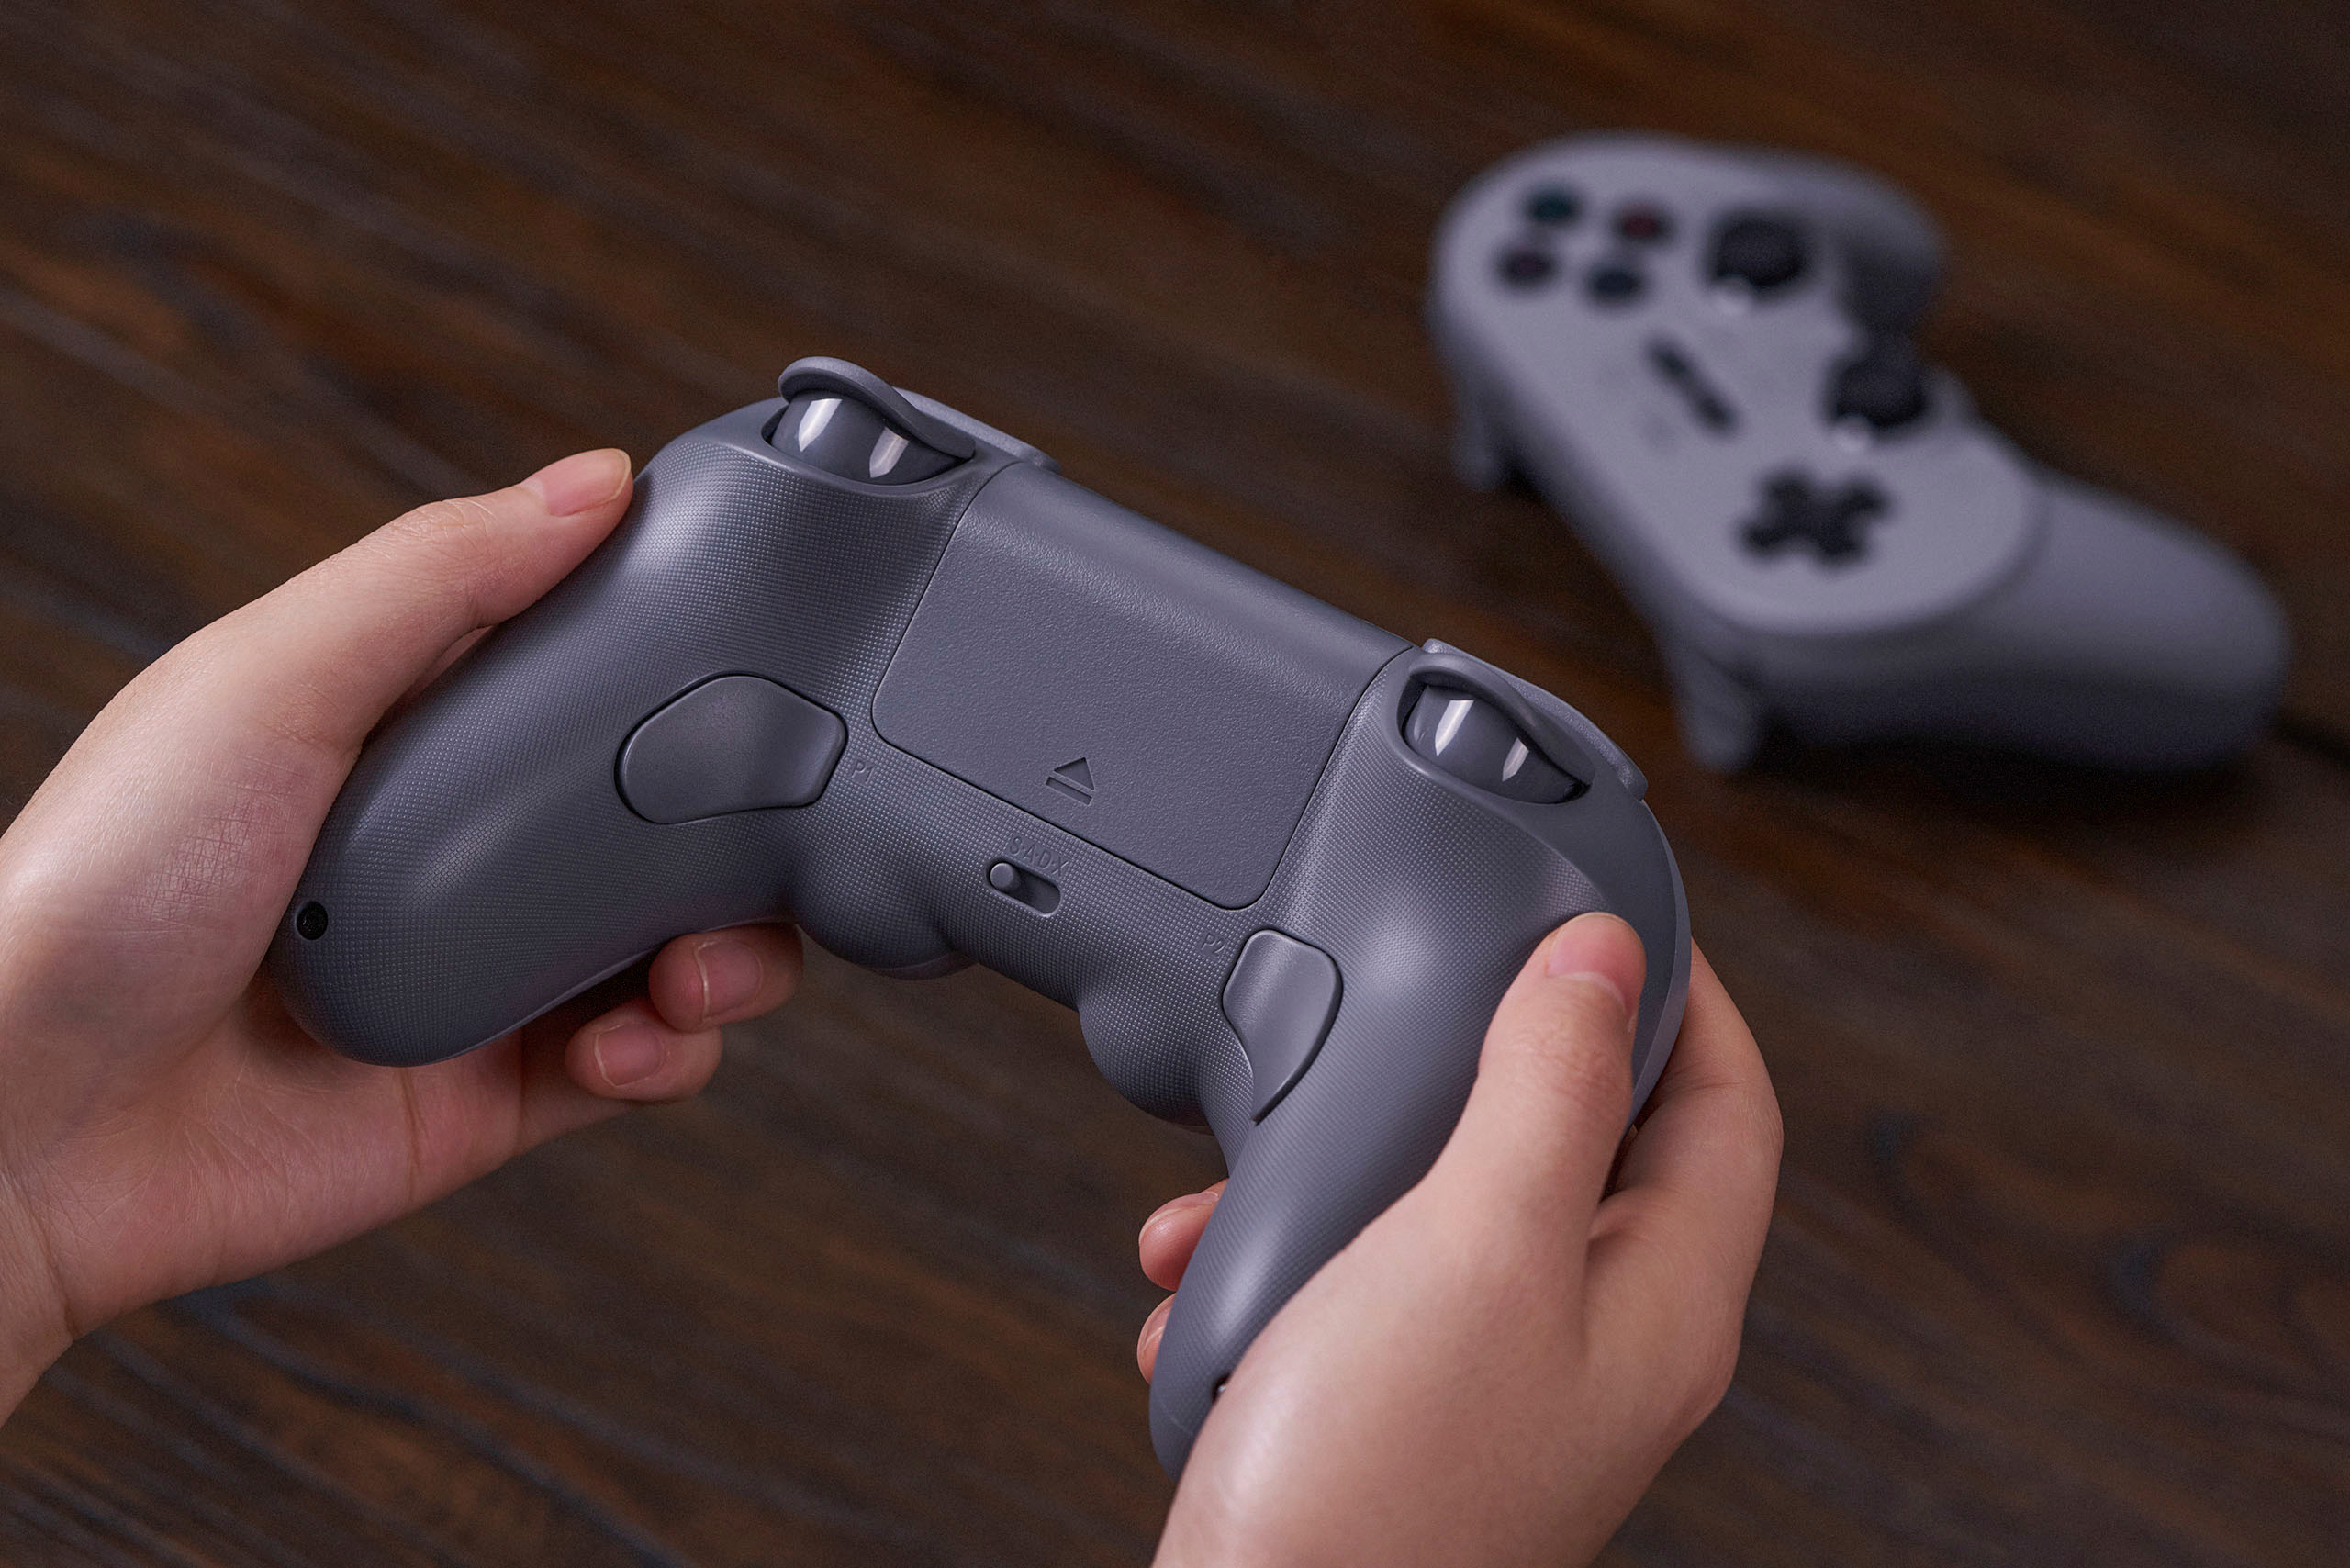 8Bitdo Pro 2 gamepad review: A $50 bargain for cool features